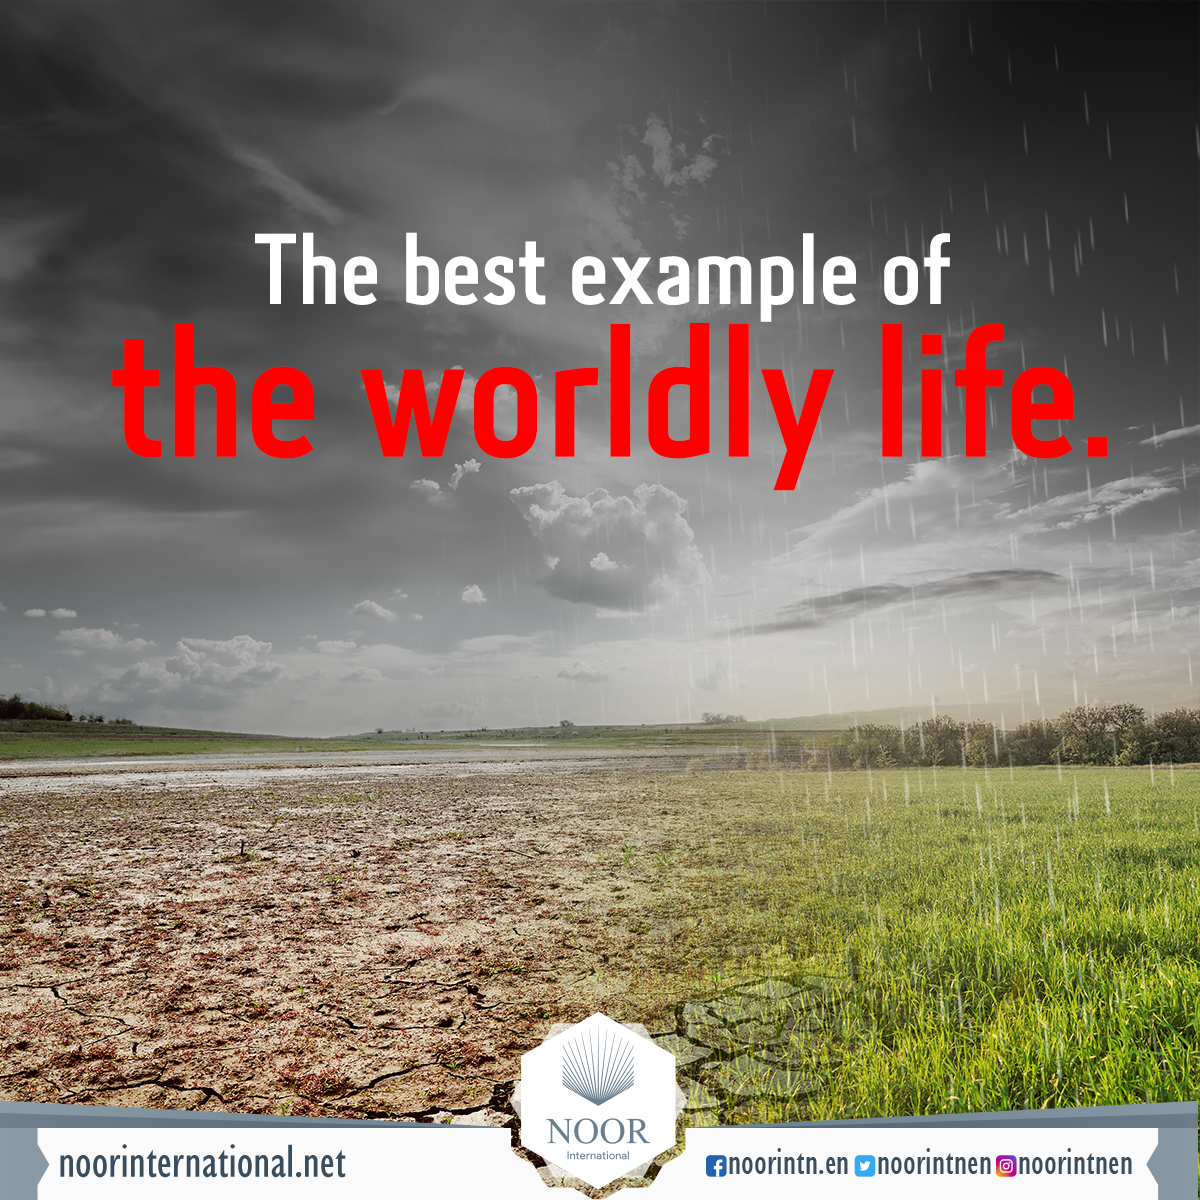 The best example of the worldly life.